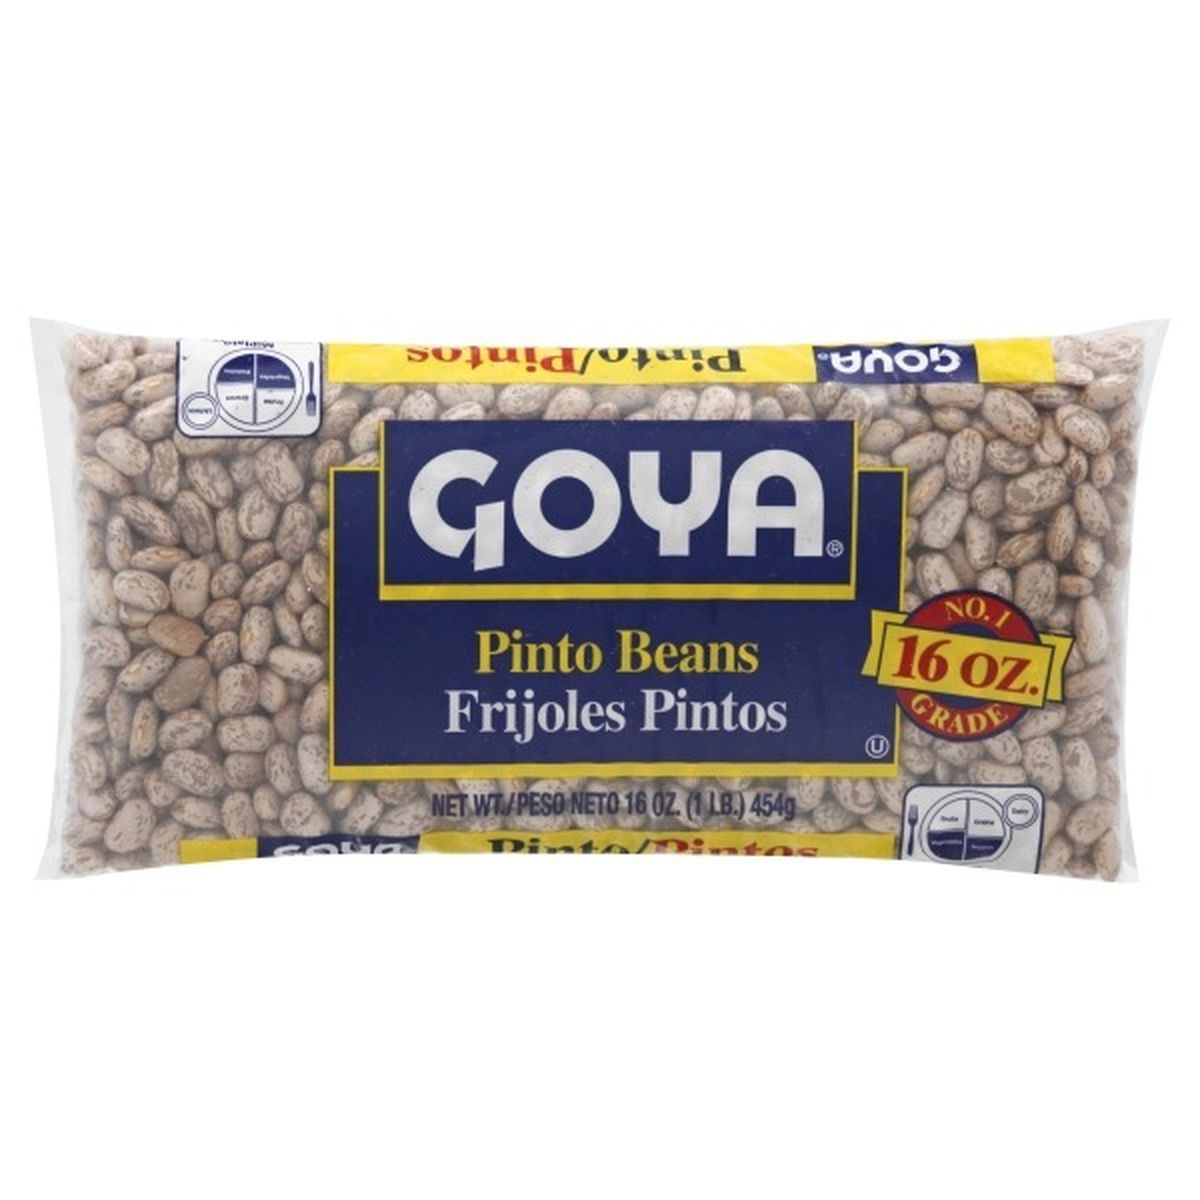 Calories in Goya Pinto Beans